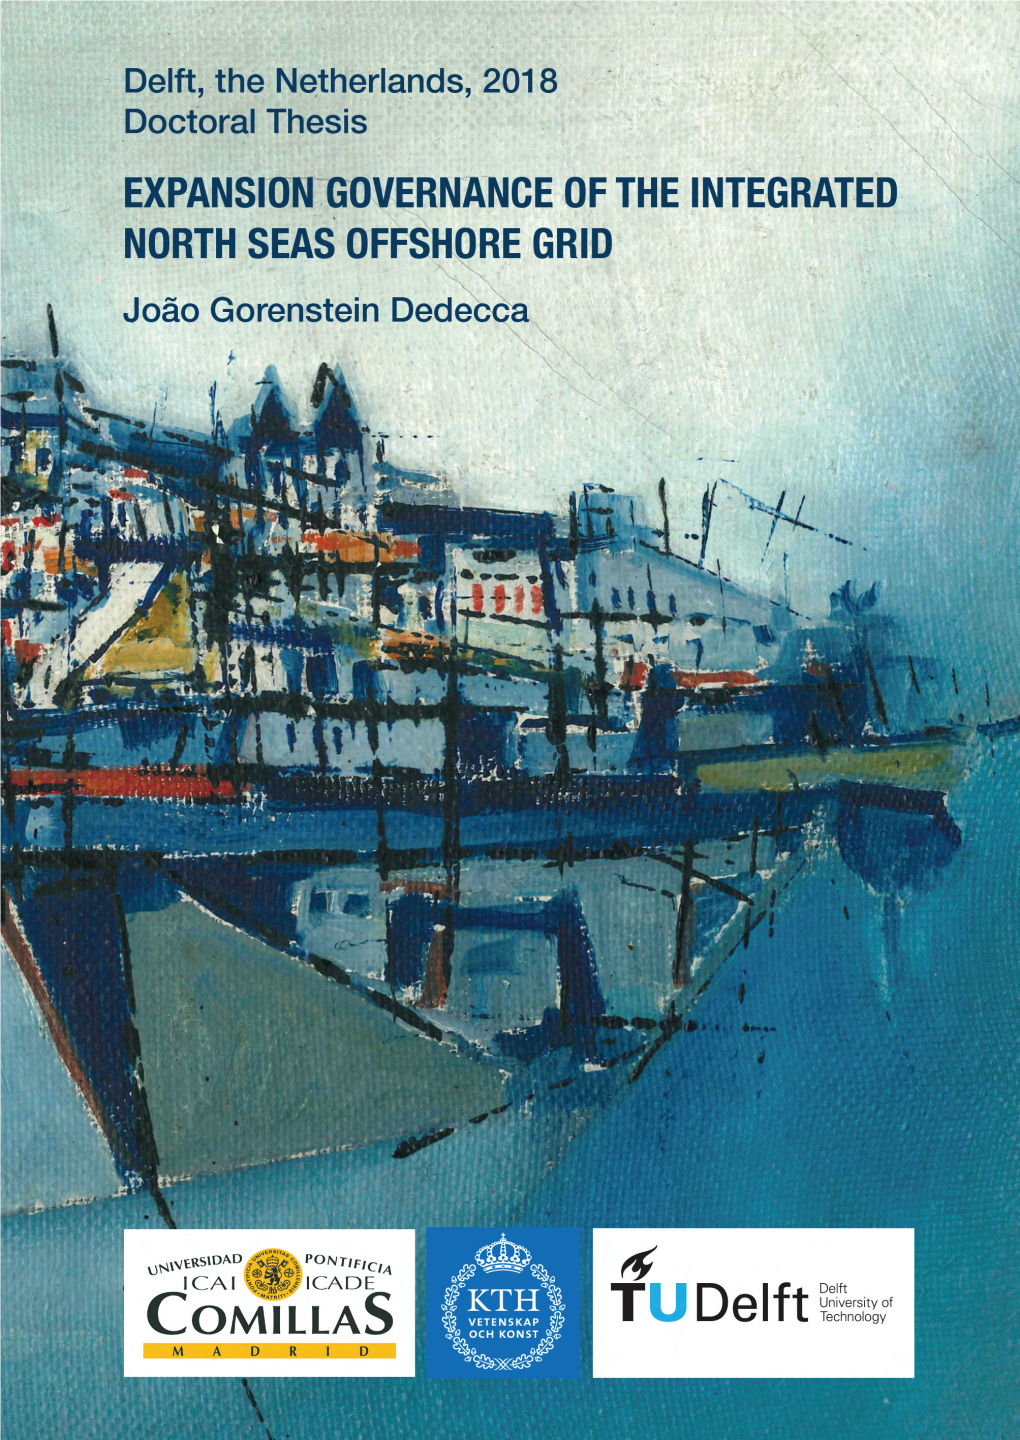 Expansion Governance of the Integrated North Seas Offshore Grid